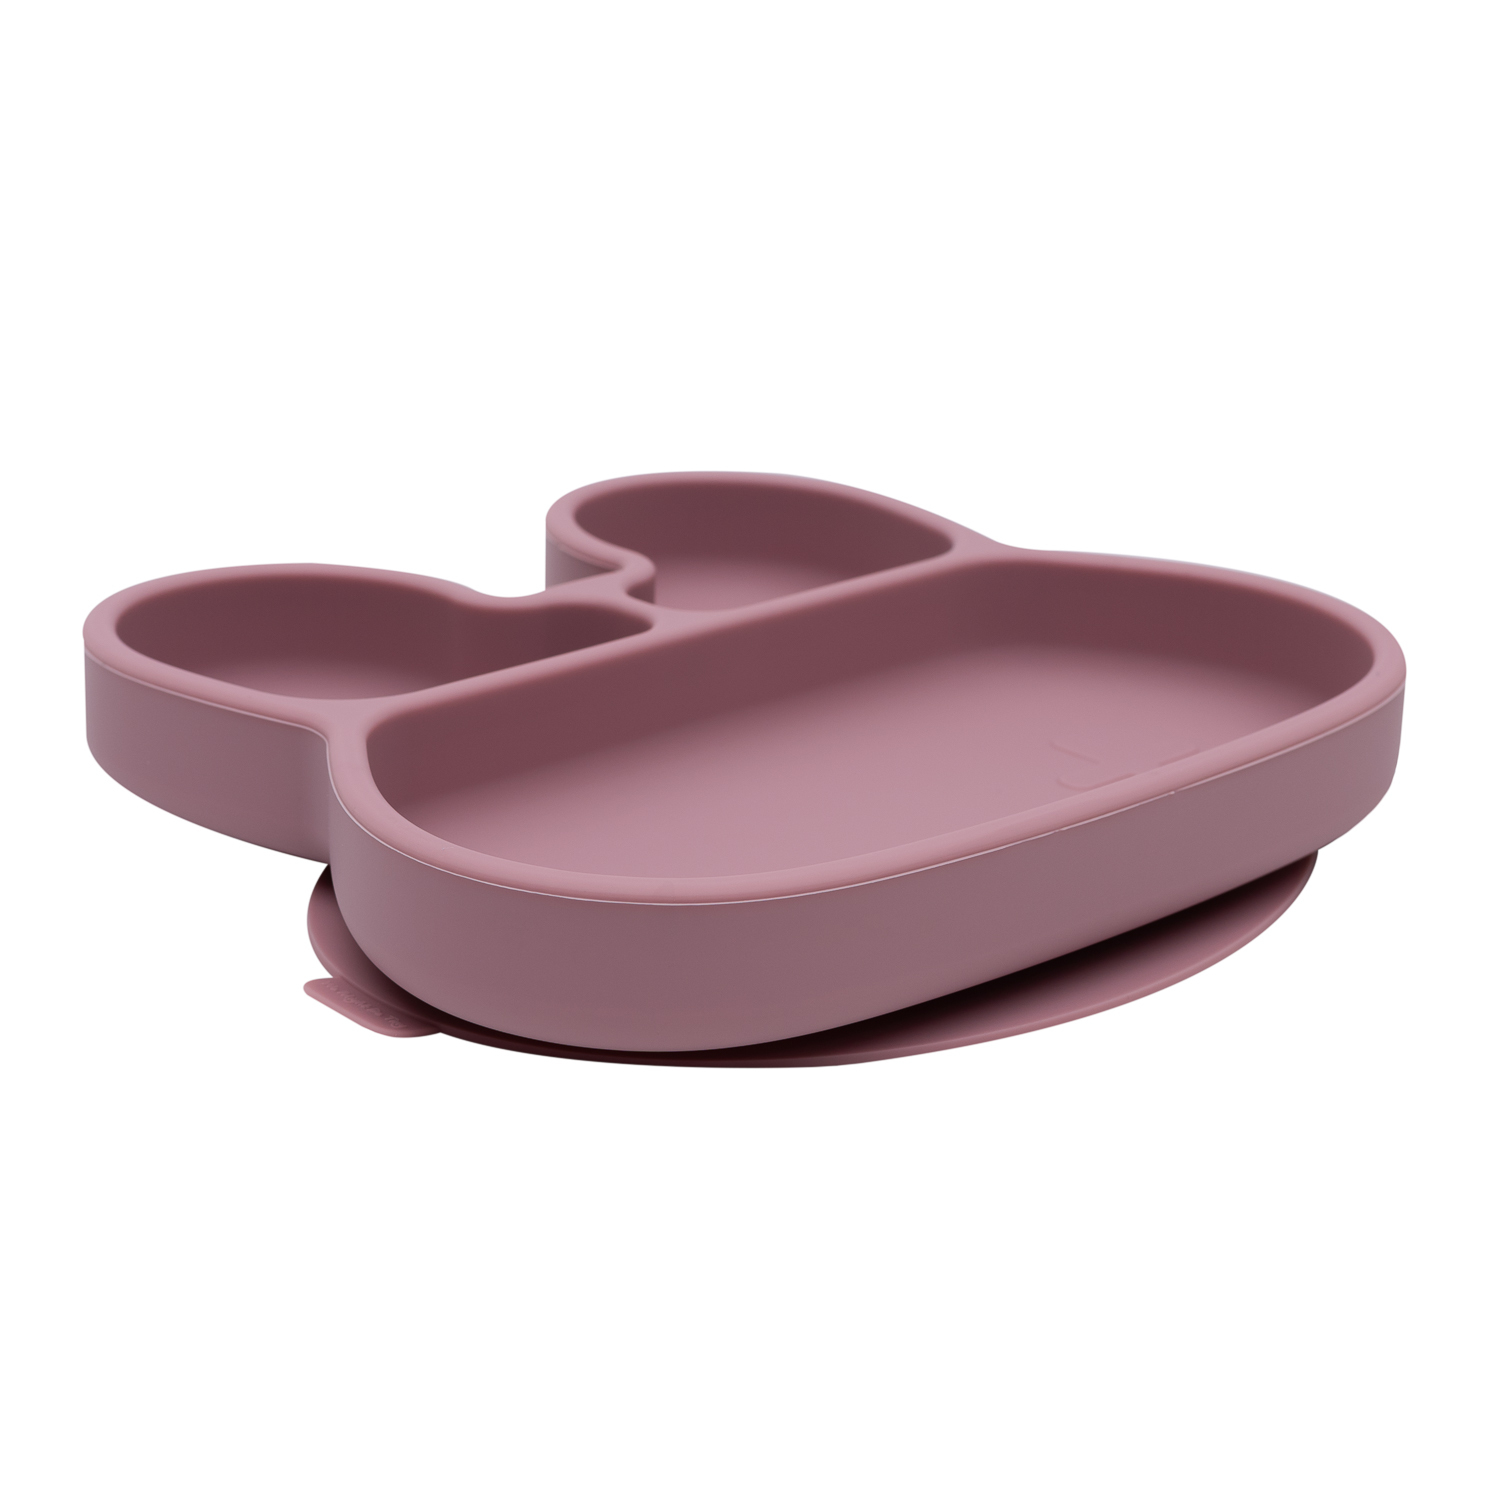 Bunny Stickie Plate - Dusty Rose Angled (low res).JPG